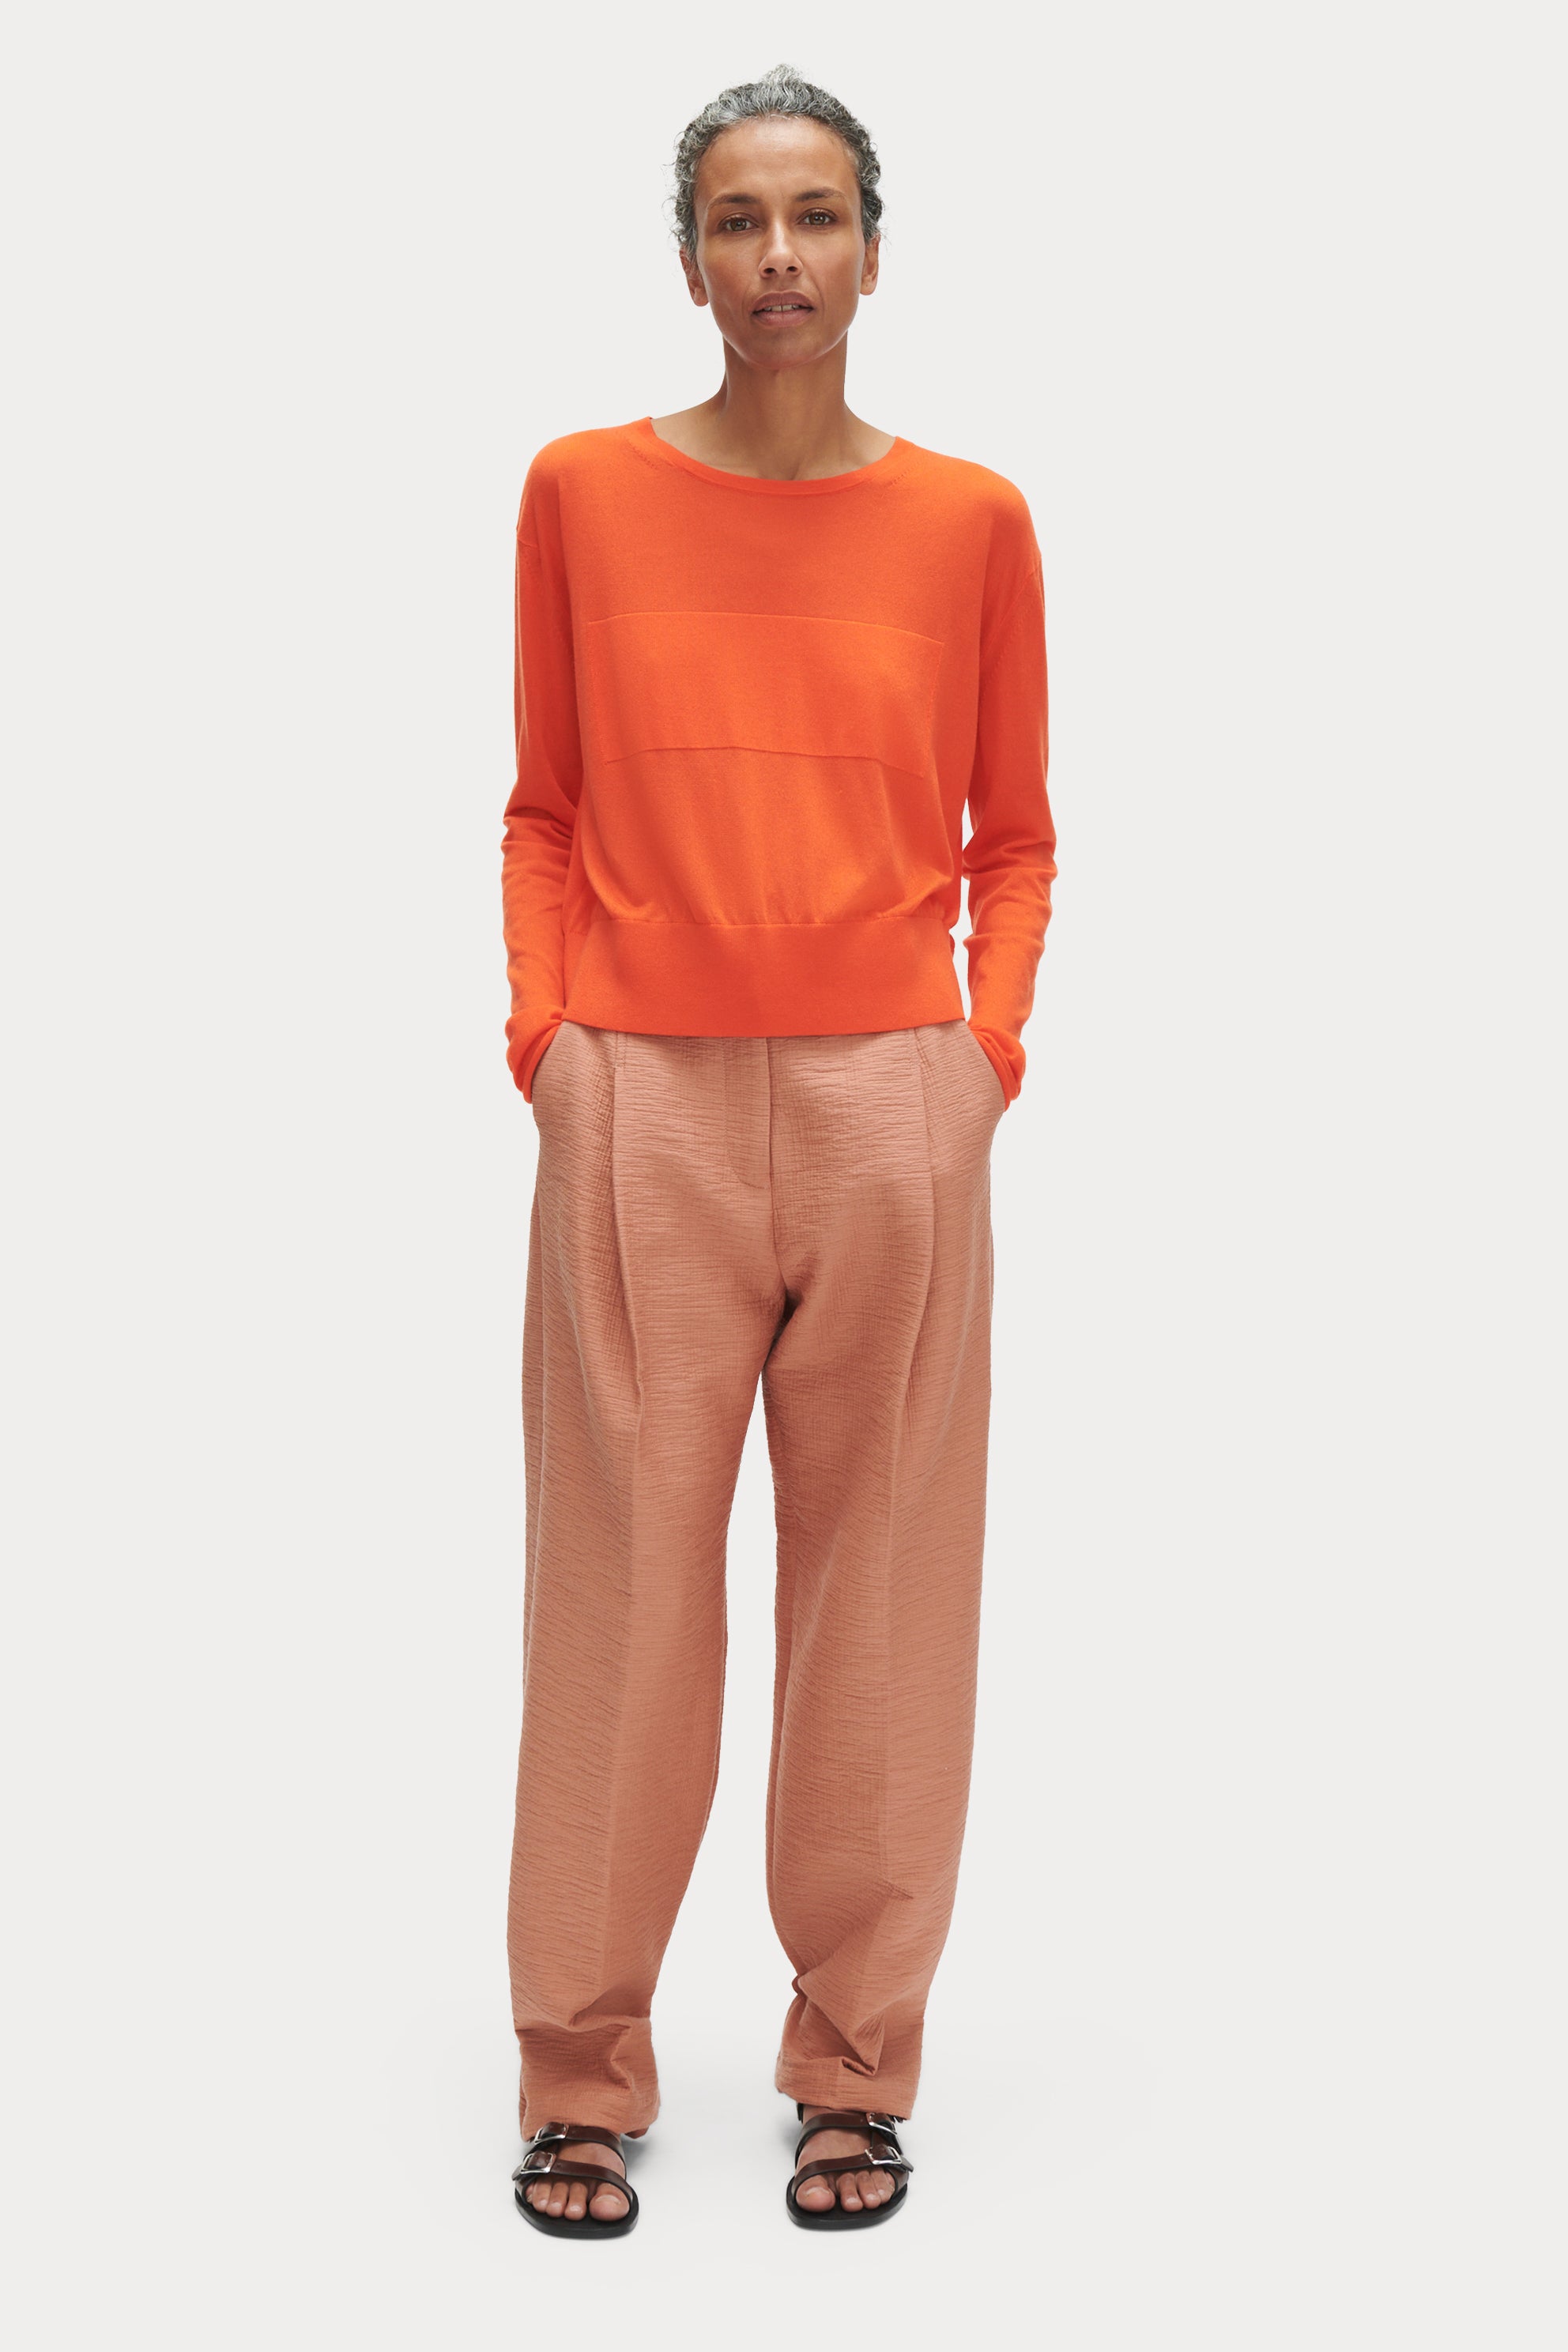 Zara, Pants & Jumpsuits, Zara High Waisted Trousers Coral Pink Xl